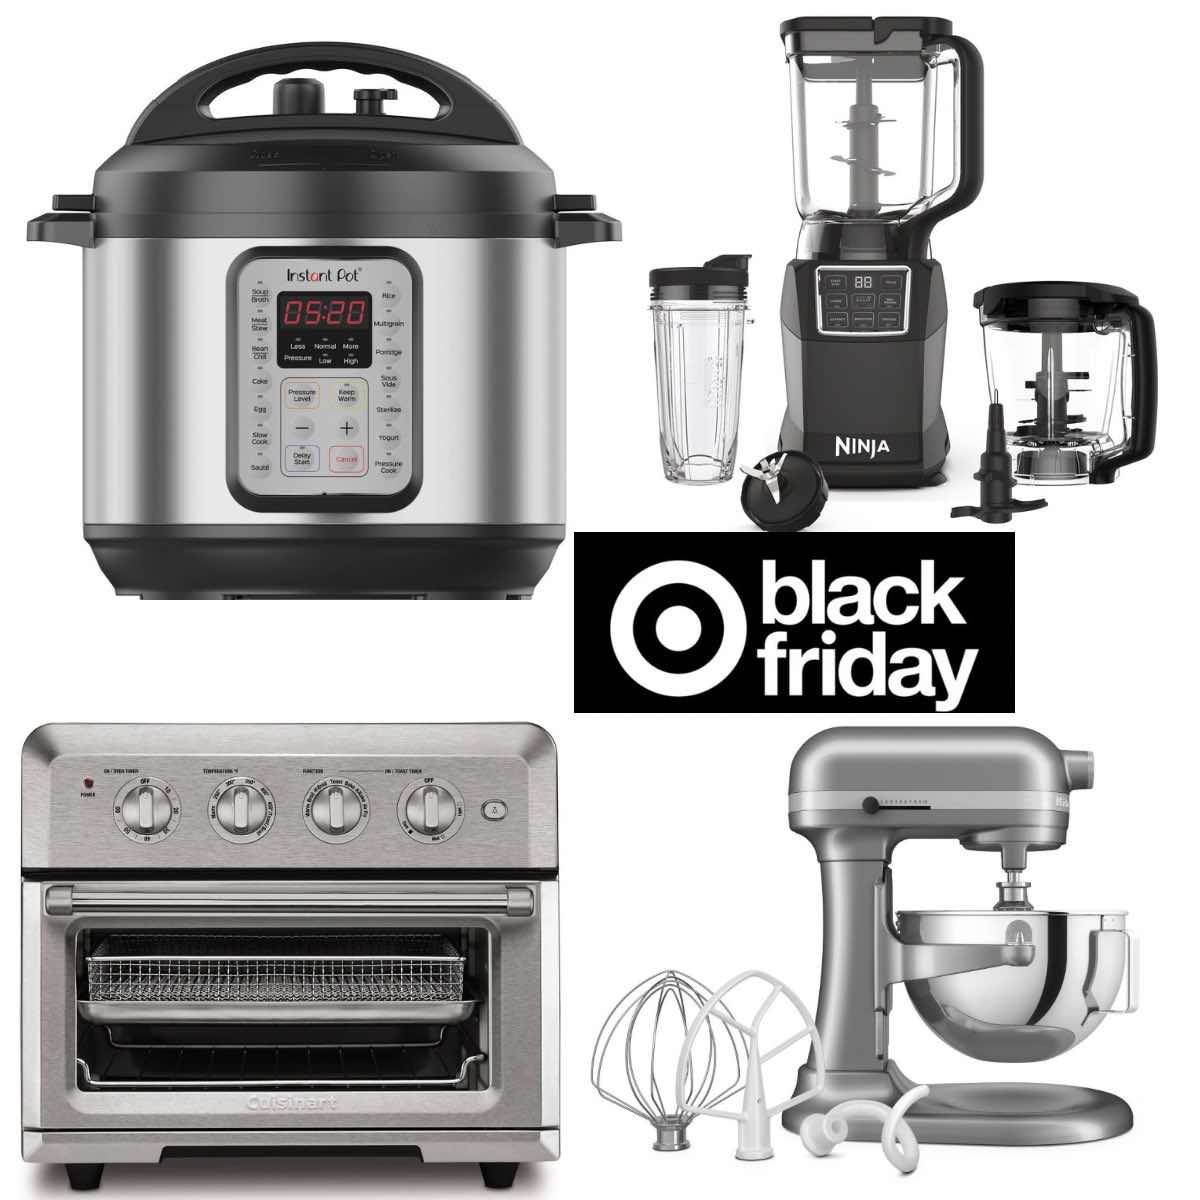 Target Black Friday deals: IP for $59+, Cuisinart air fryer for $99+, Kitchenaid for $249 and more